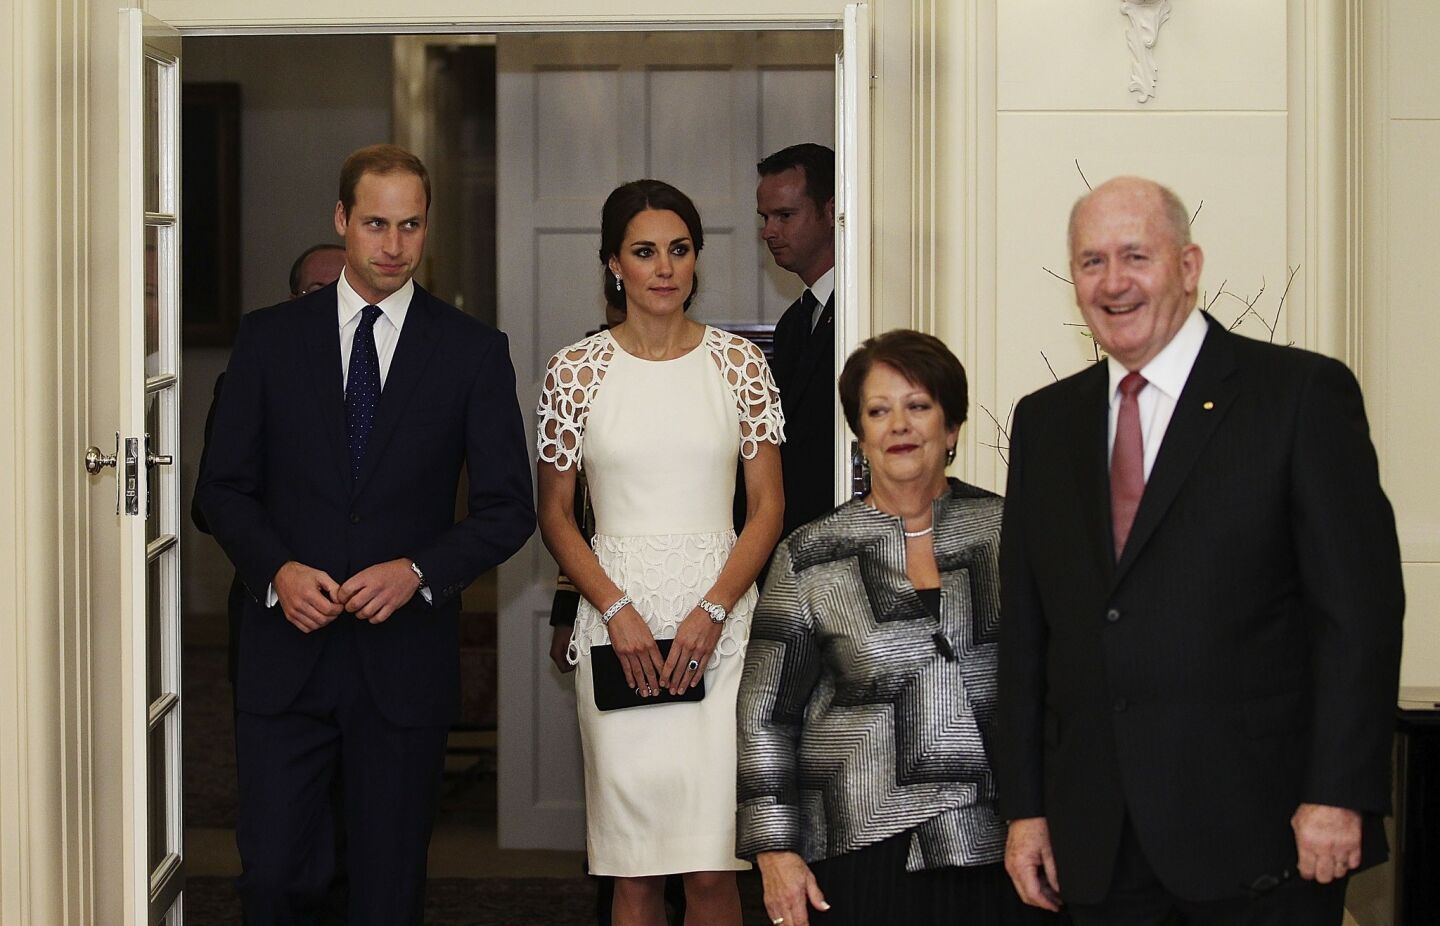 The duke and duchess arrive at a reception at Government House behind their hosts, Governor-General Peter Cosgrove and his wife.